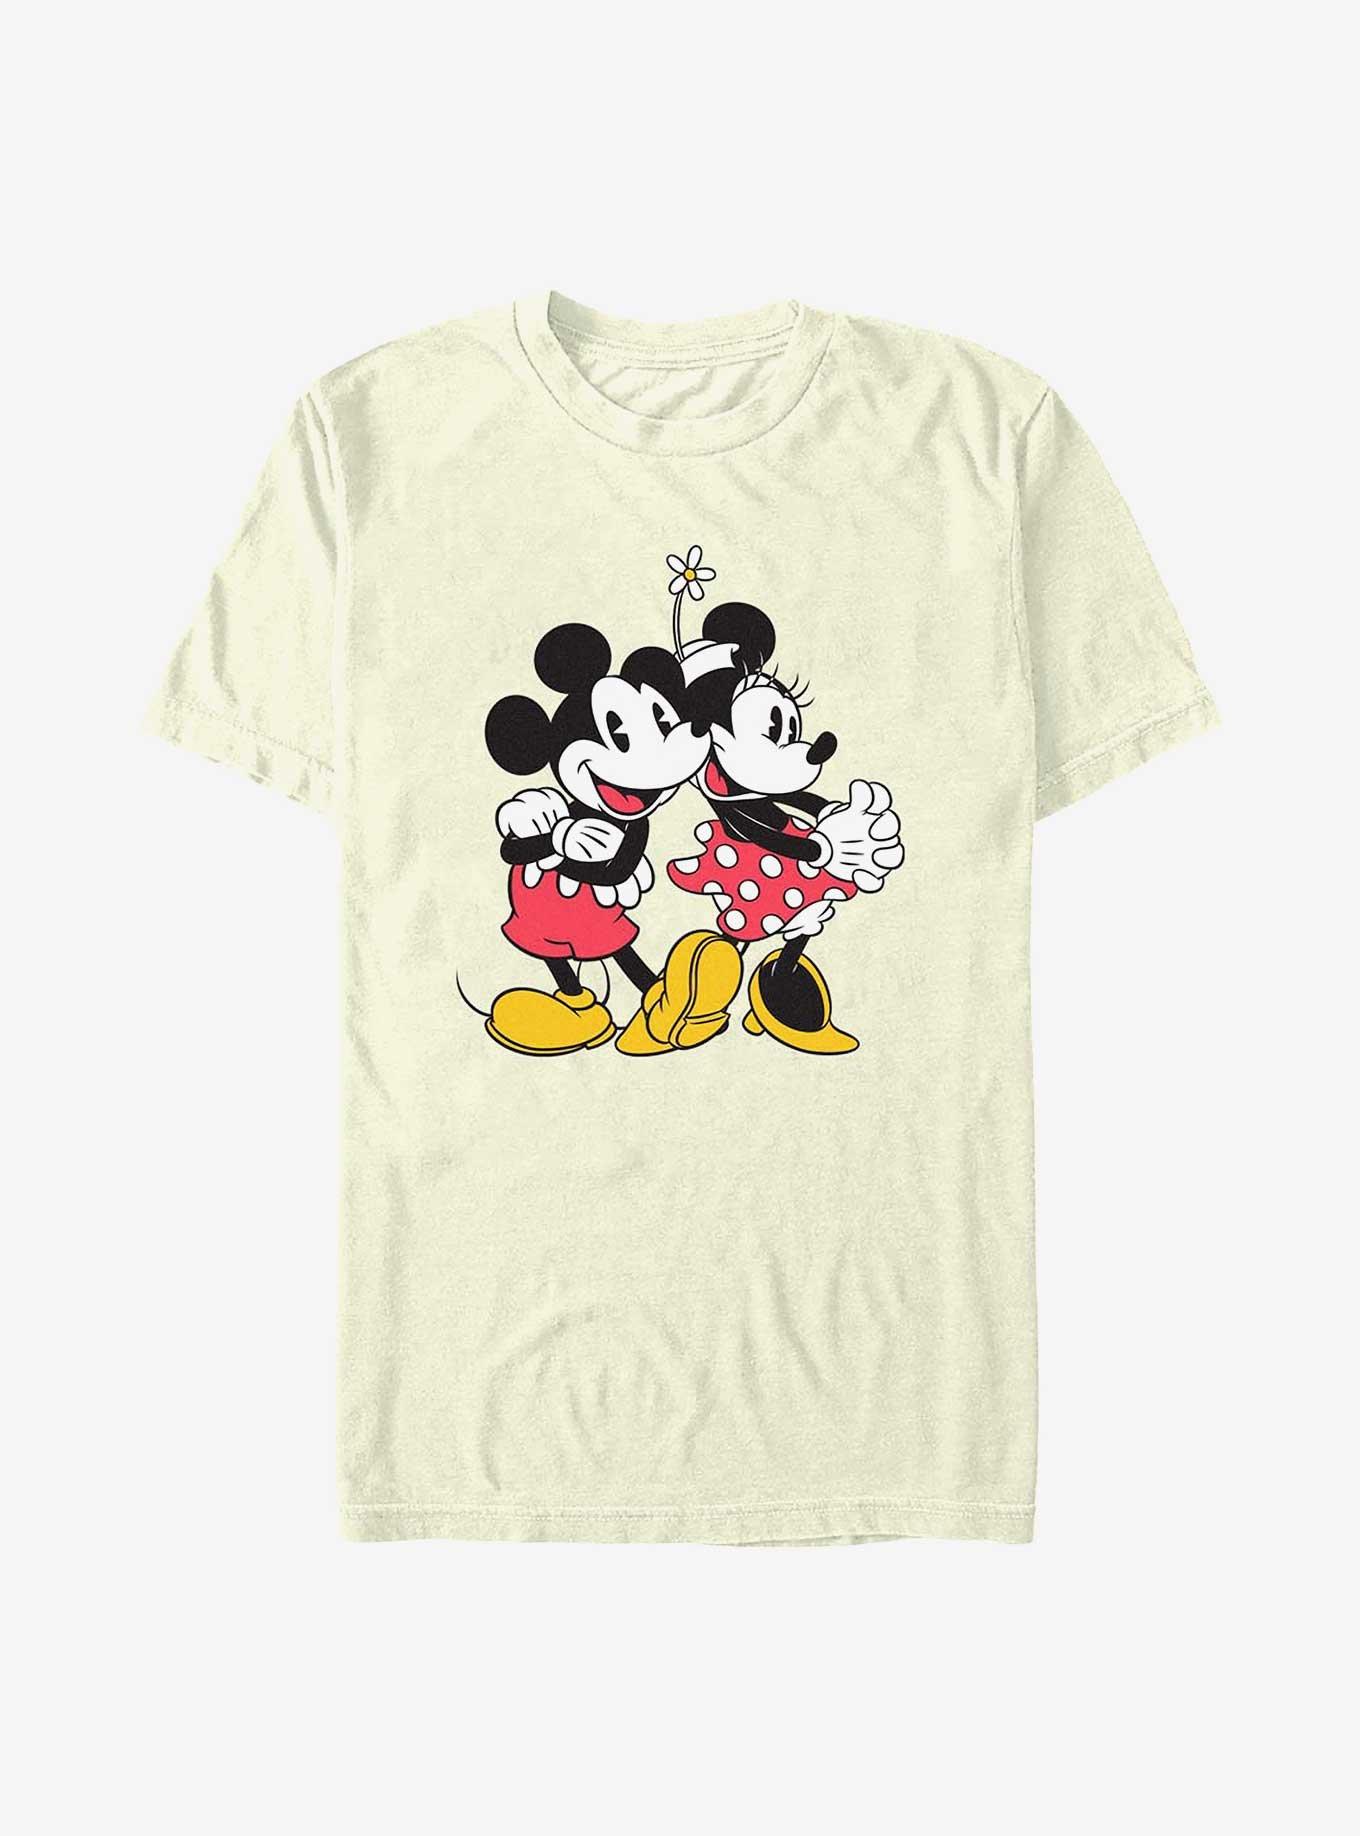 Disney Mickey Mouse & Minnie Mouse Golden Couple T-Shirt, NATURAL, hi-res